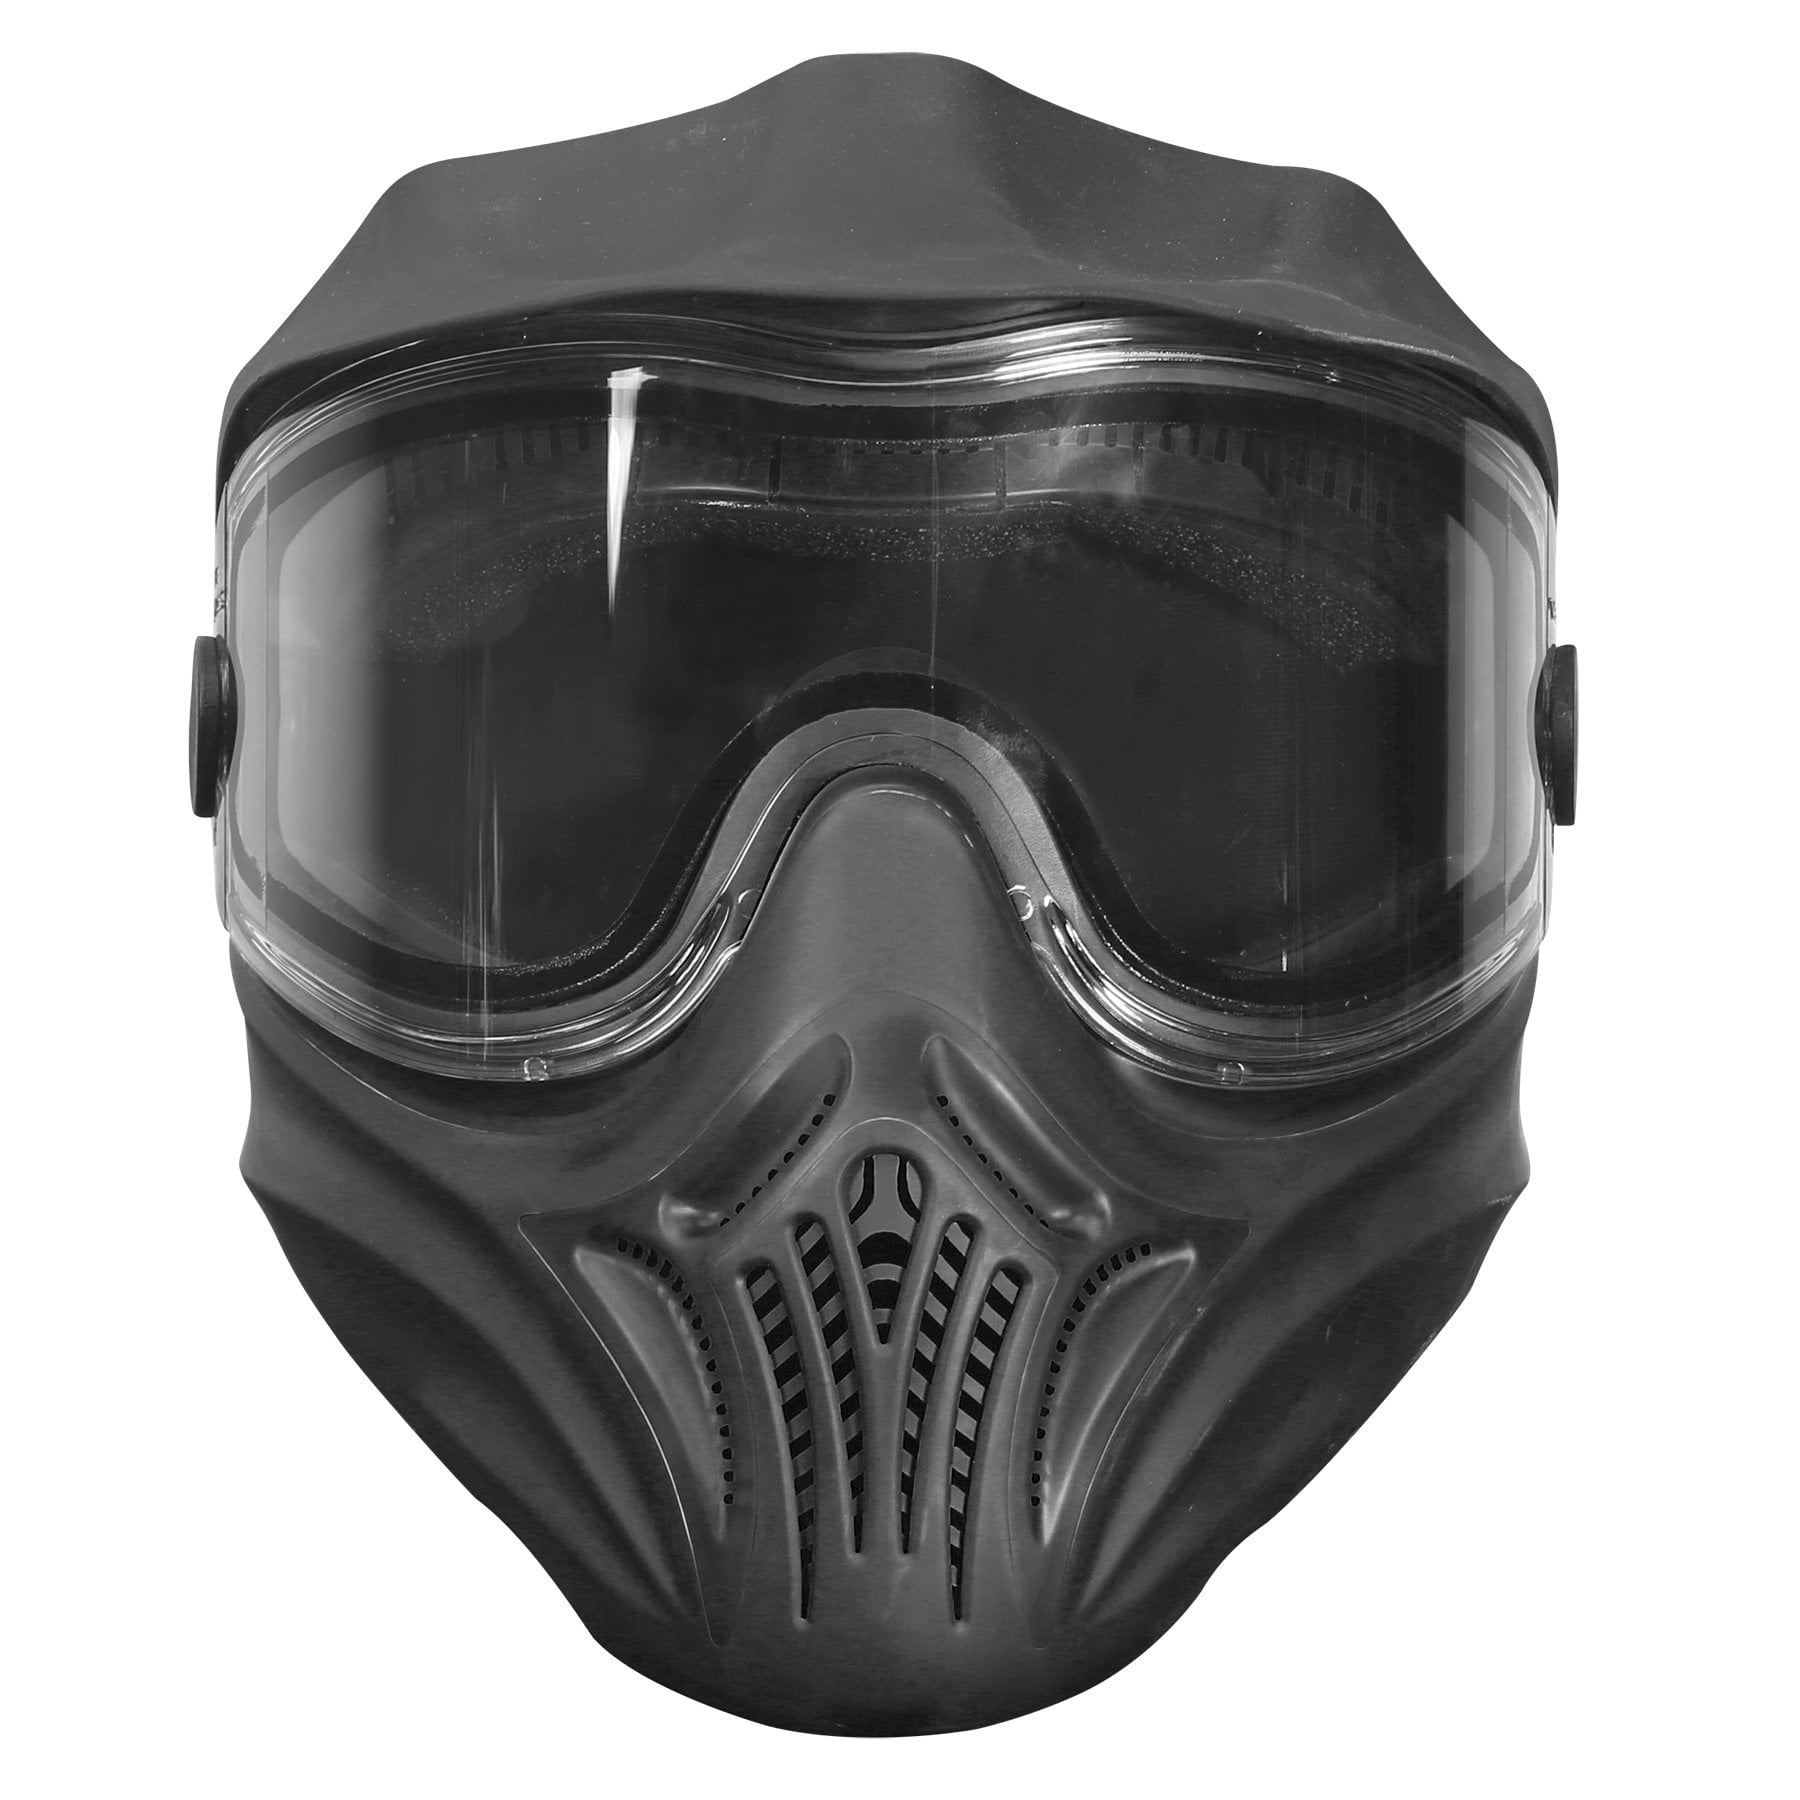 VForce Armor Paintball Goggle Mask with Thermal Lens, Black